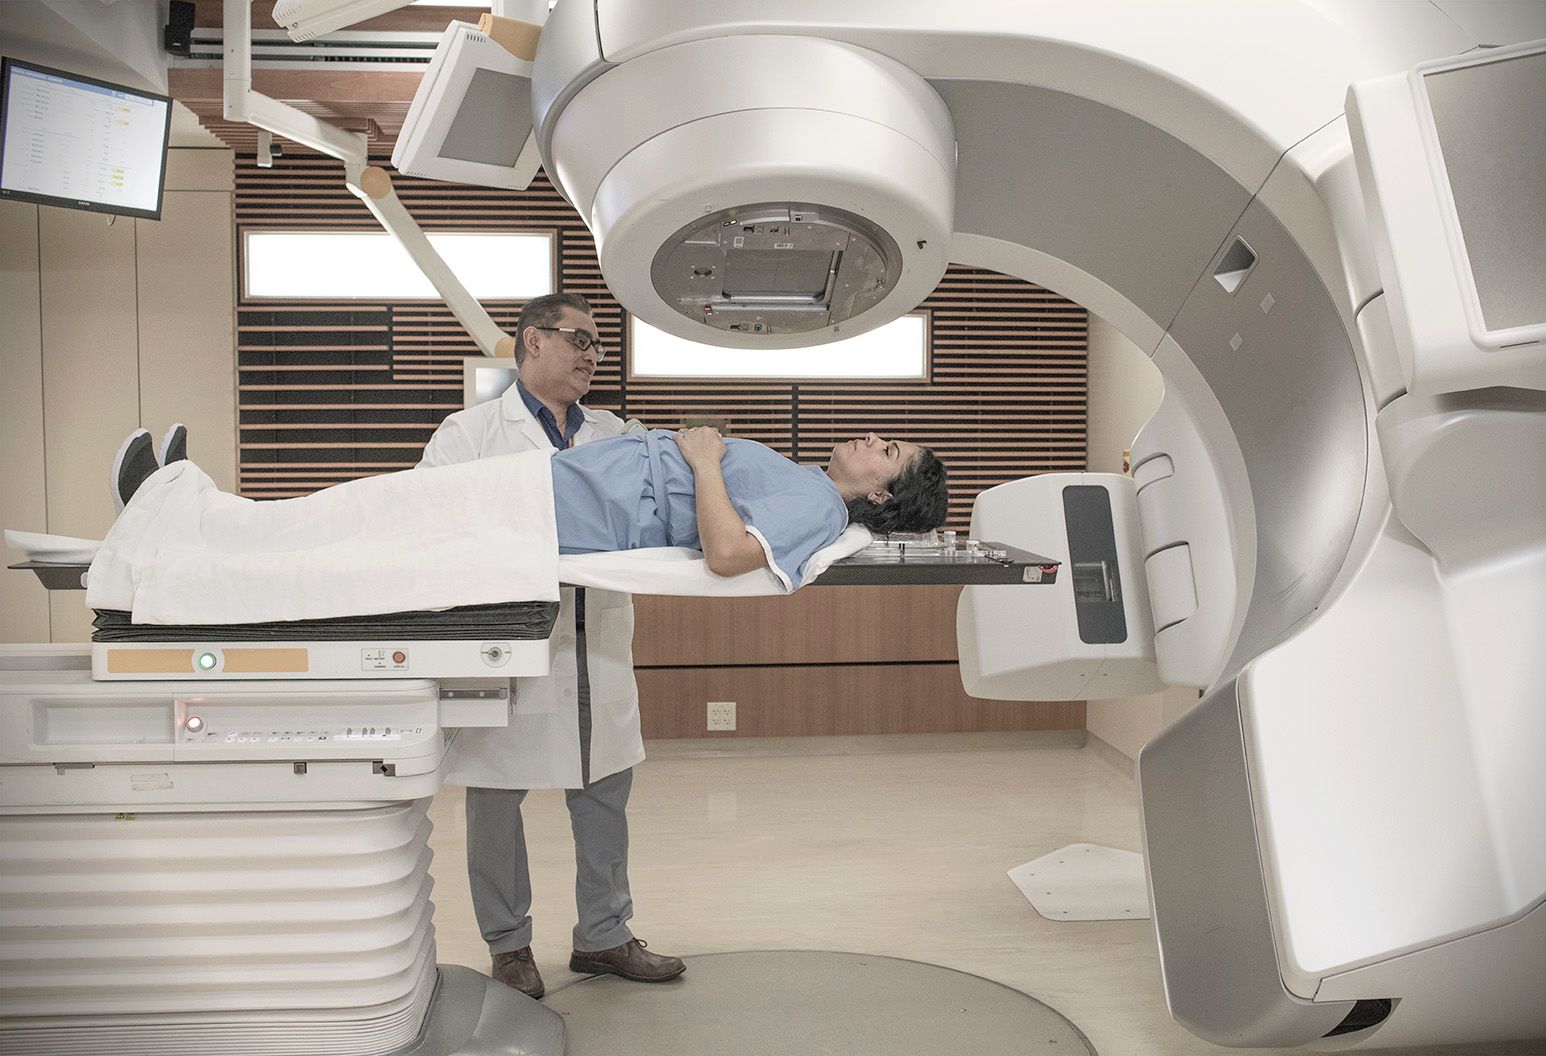 Radiation Therapy for Cancer: How Does It Work?